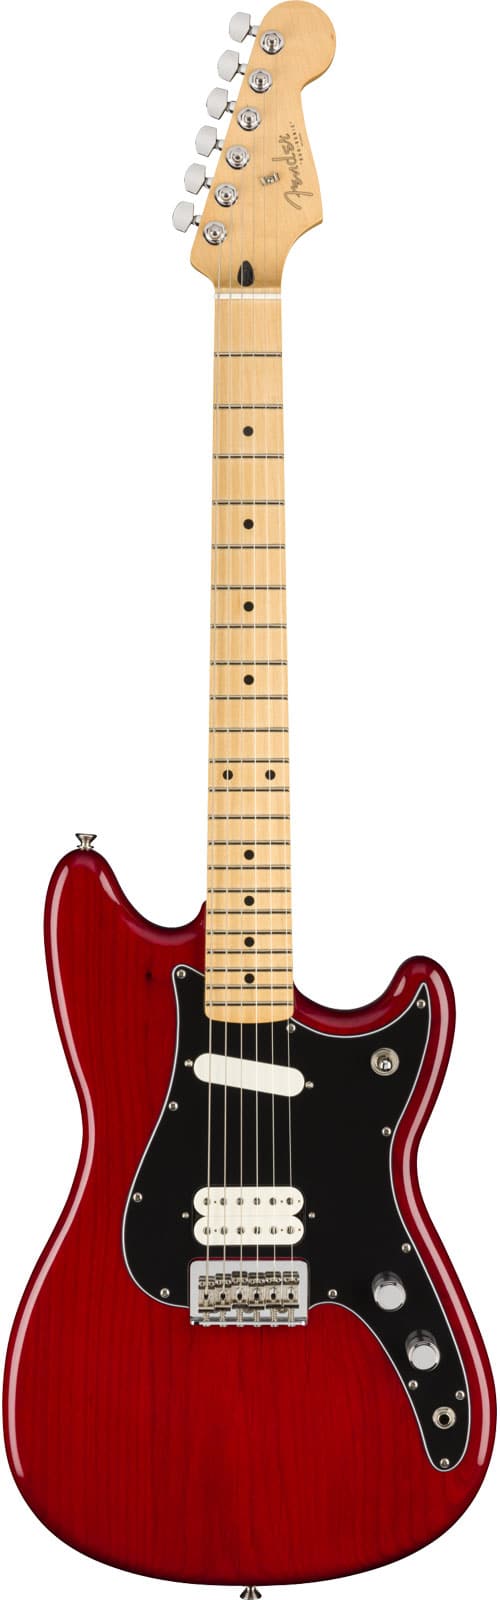 FENDER MEXICAN PLAYER DUO-SONIC HS MN, CRIMSON RED TRANSPARENT